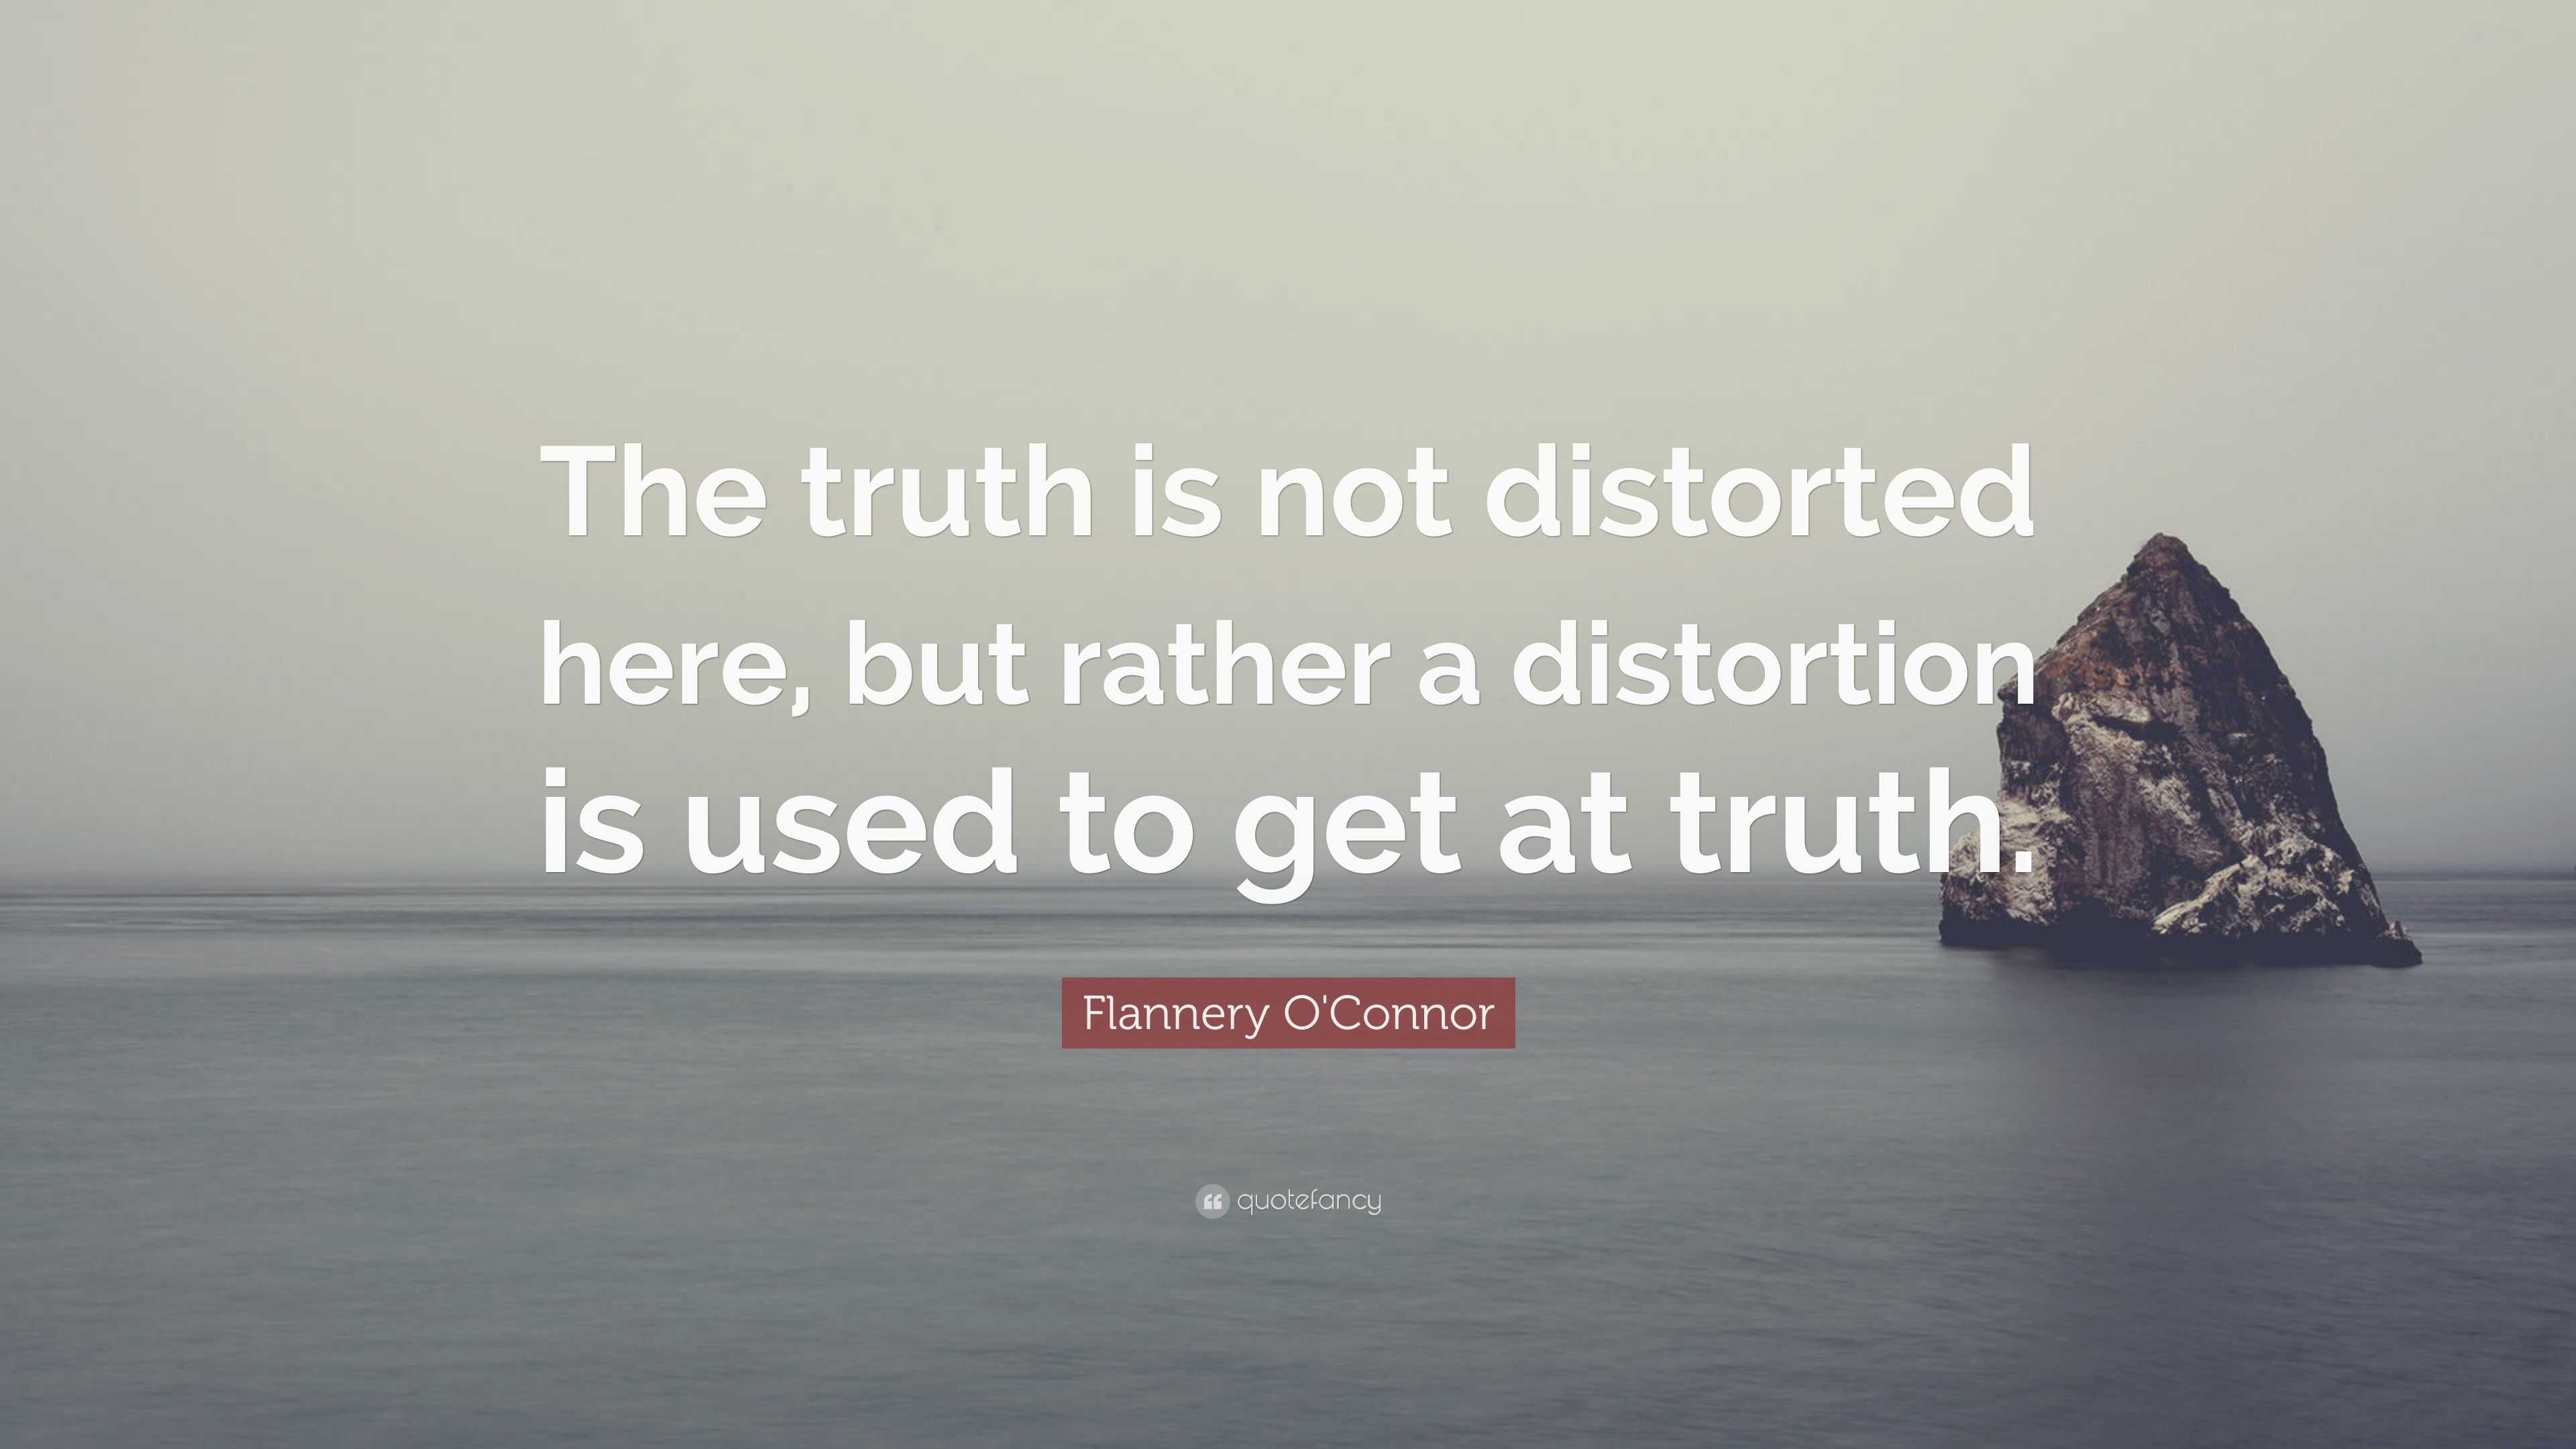 Flannery O'Connor Quote: “The truth is not distorted here, but rather a